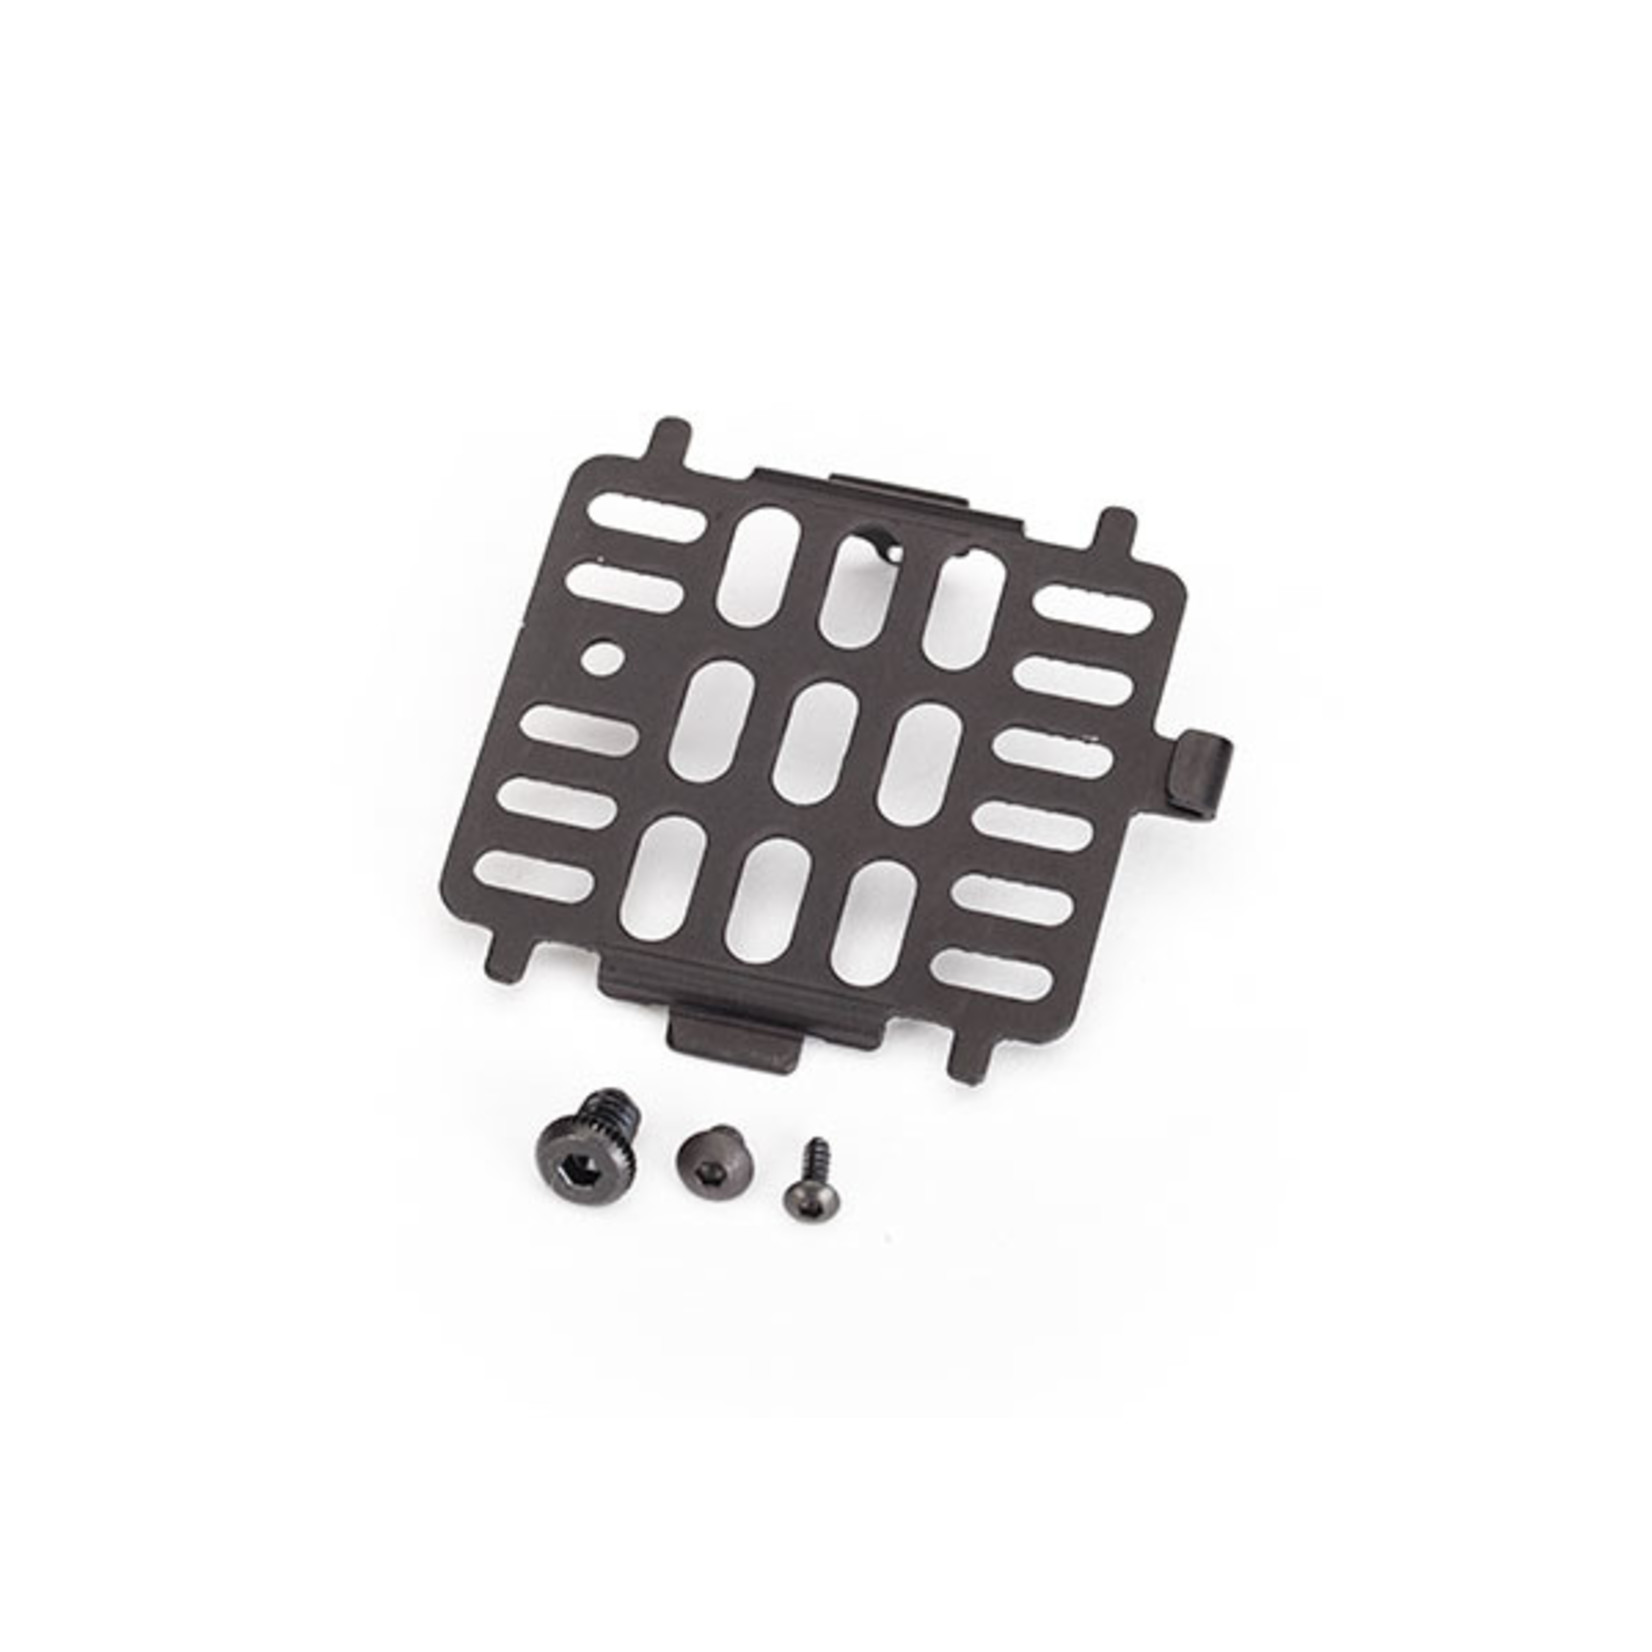 Traxxas 7976 - Mount, camera (for use with Traxxas 2-axis